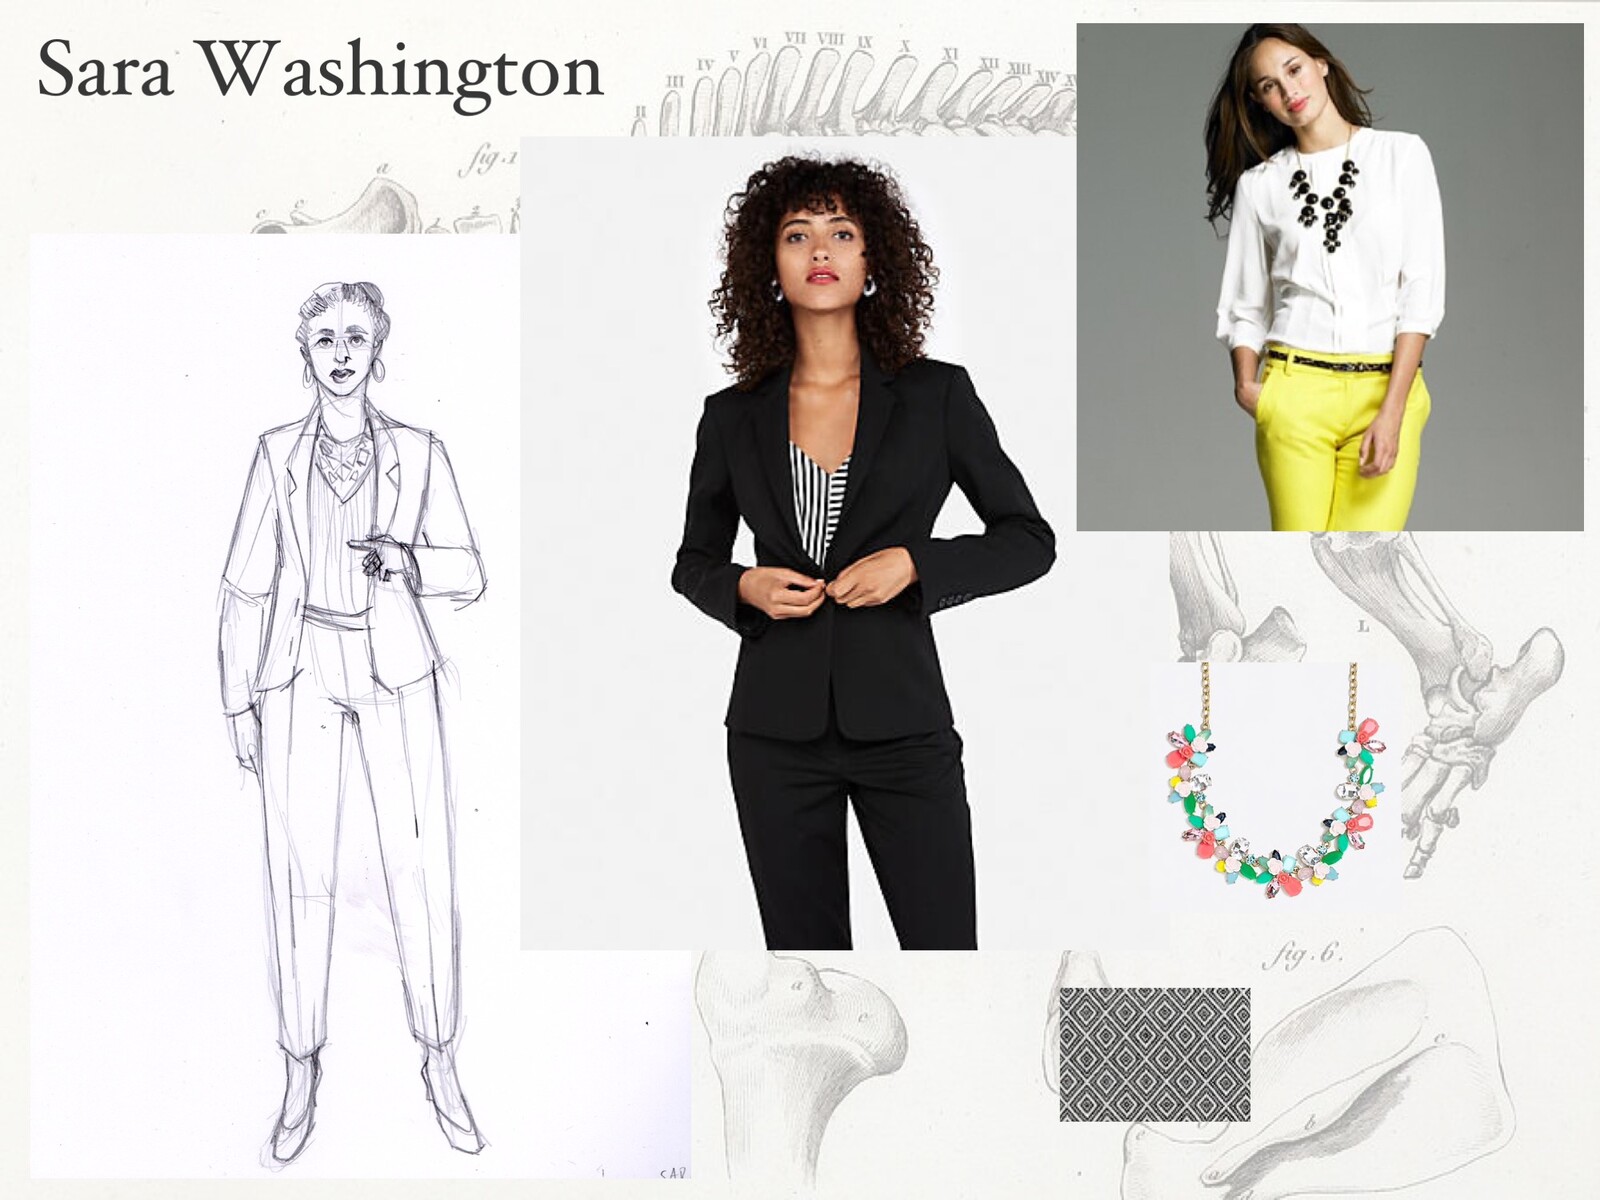 Sara Washington: reference. Images taken from the 2007-2008 J/Crew catalog and other fashions from the time period. She's an academic through and through, and presents sharper and harder than she actually is.